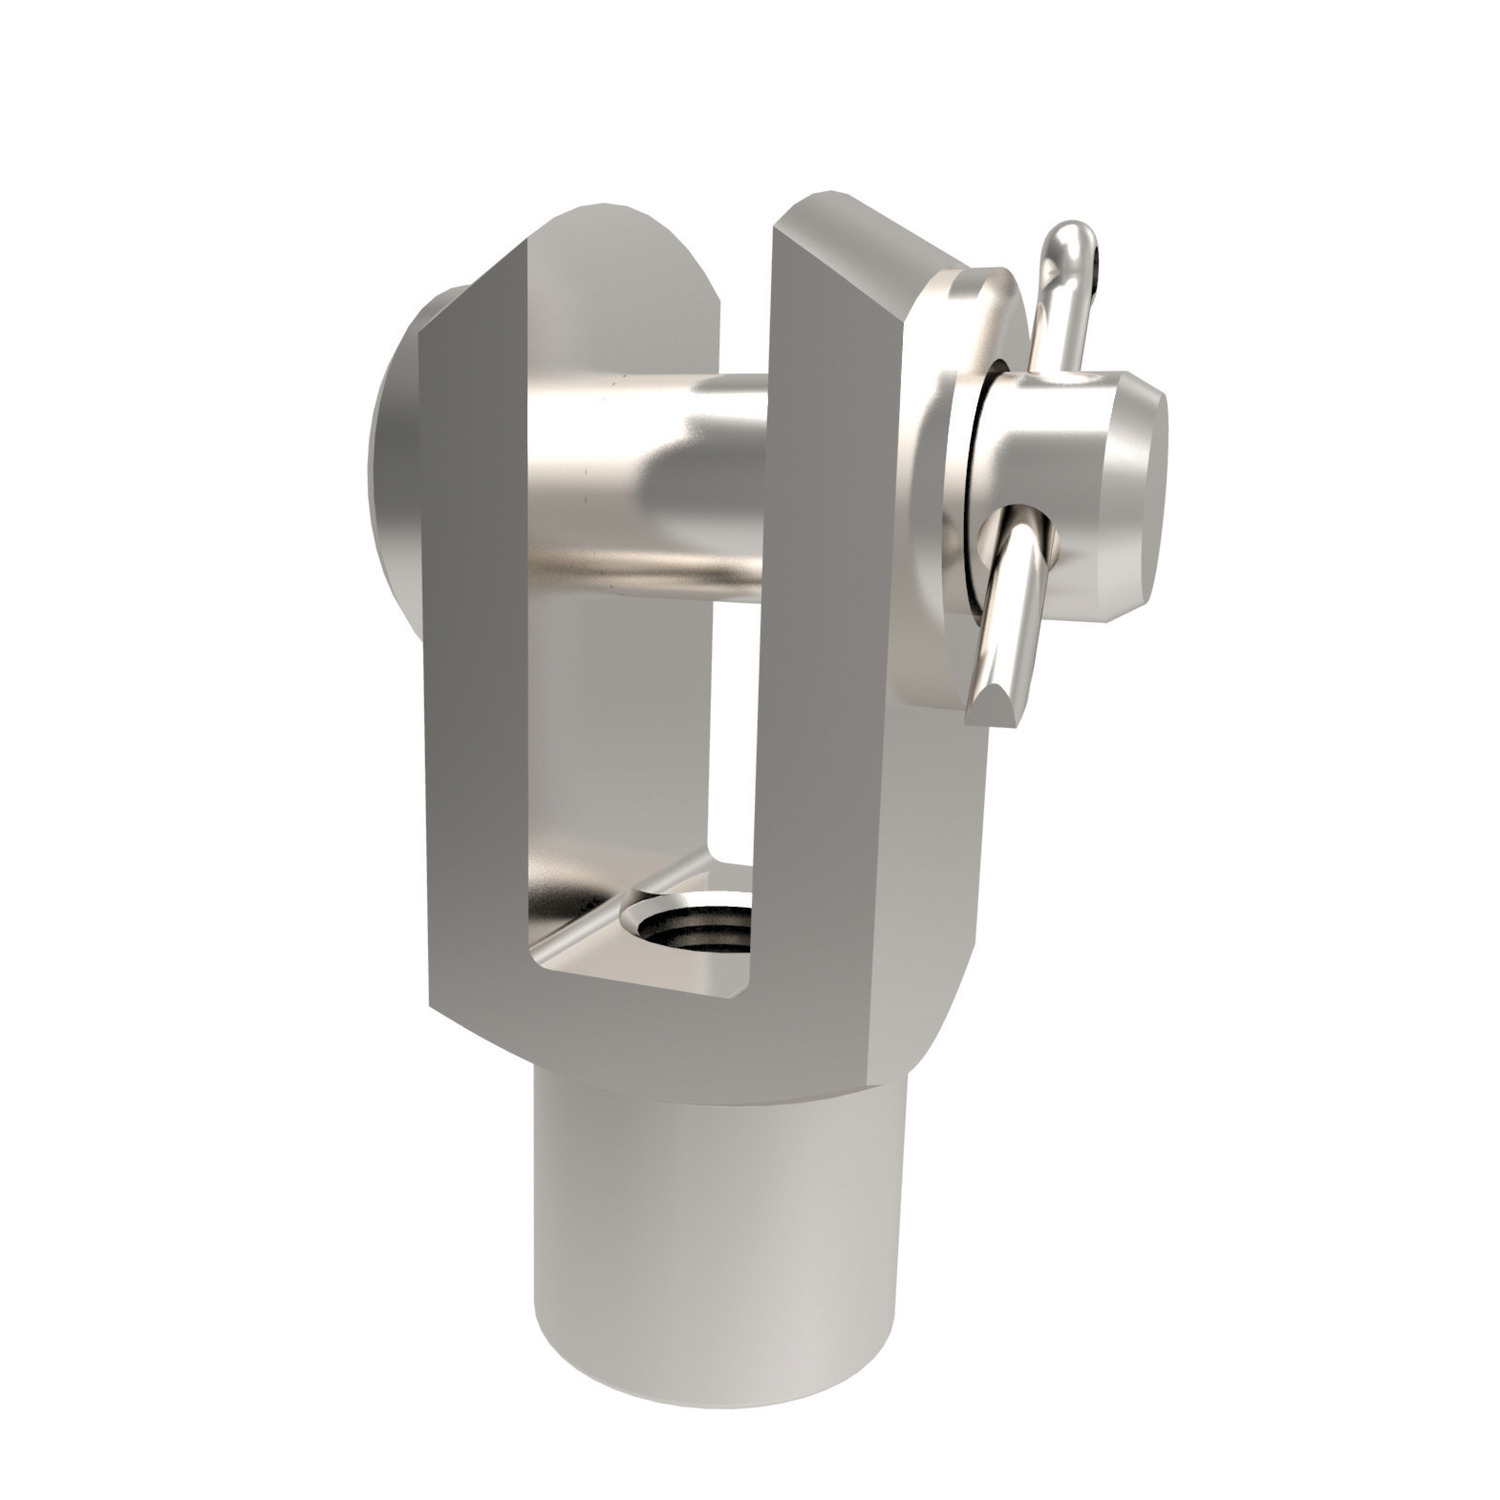 Stainless Clevis Joint with Pin Stainless steel clevis joint assembly with clevis pin, washer and split pin.